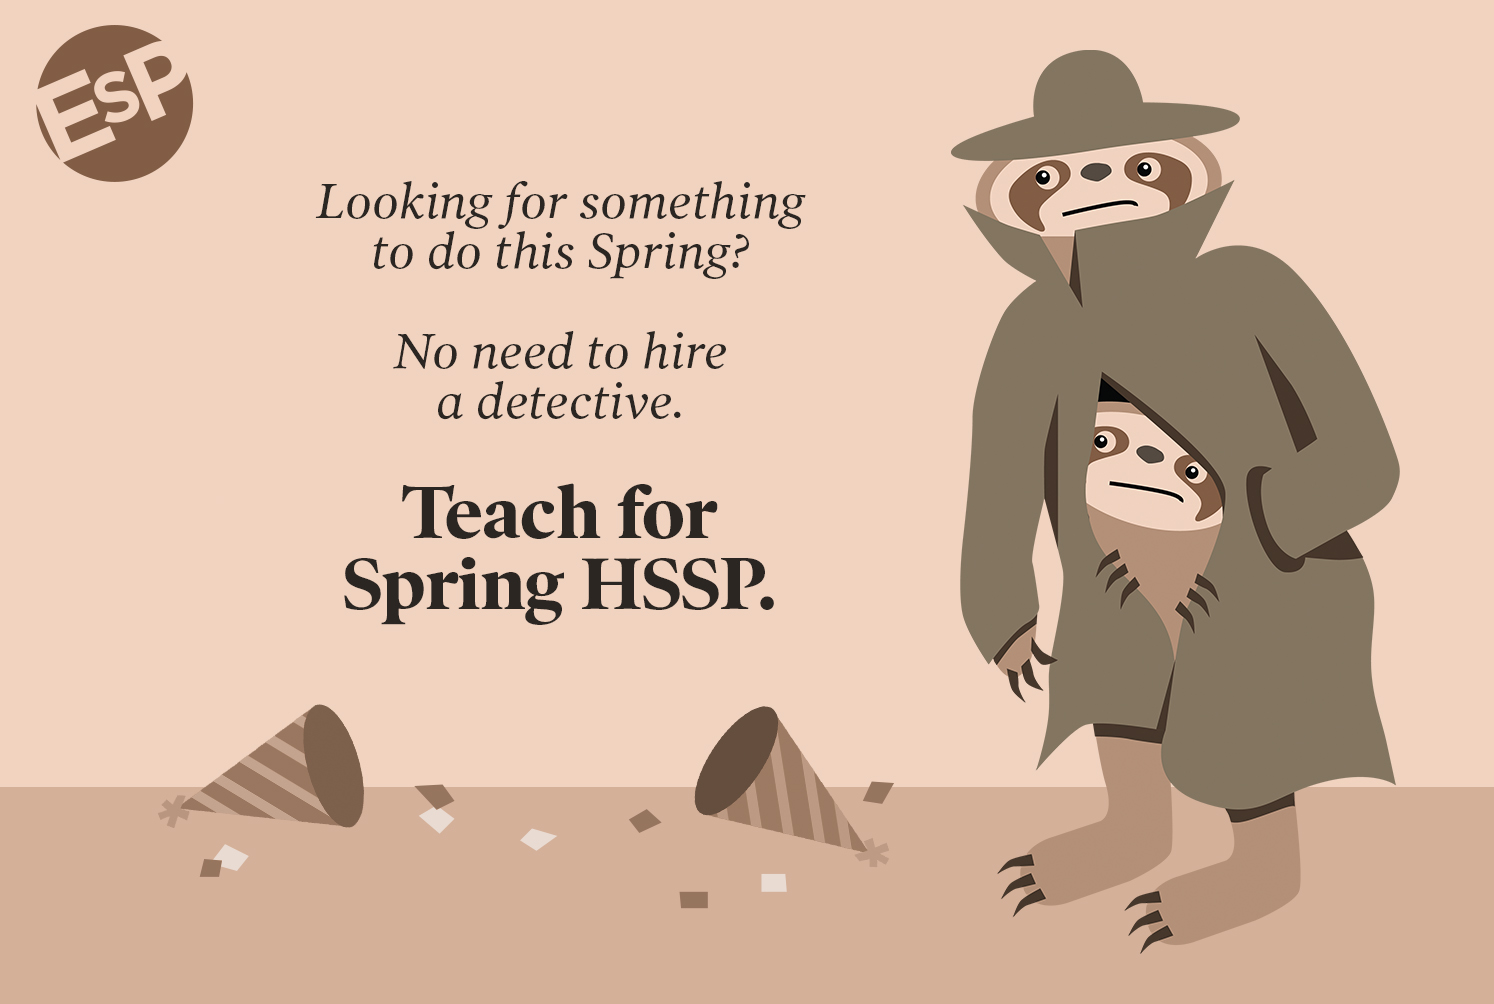 a post card. "Looking for something to do this Spring? No need to hire a detective. Teach for Spring HSSP." to the right is what is obviously two sloths in a trenchcoat